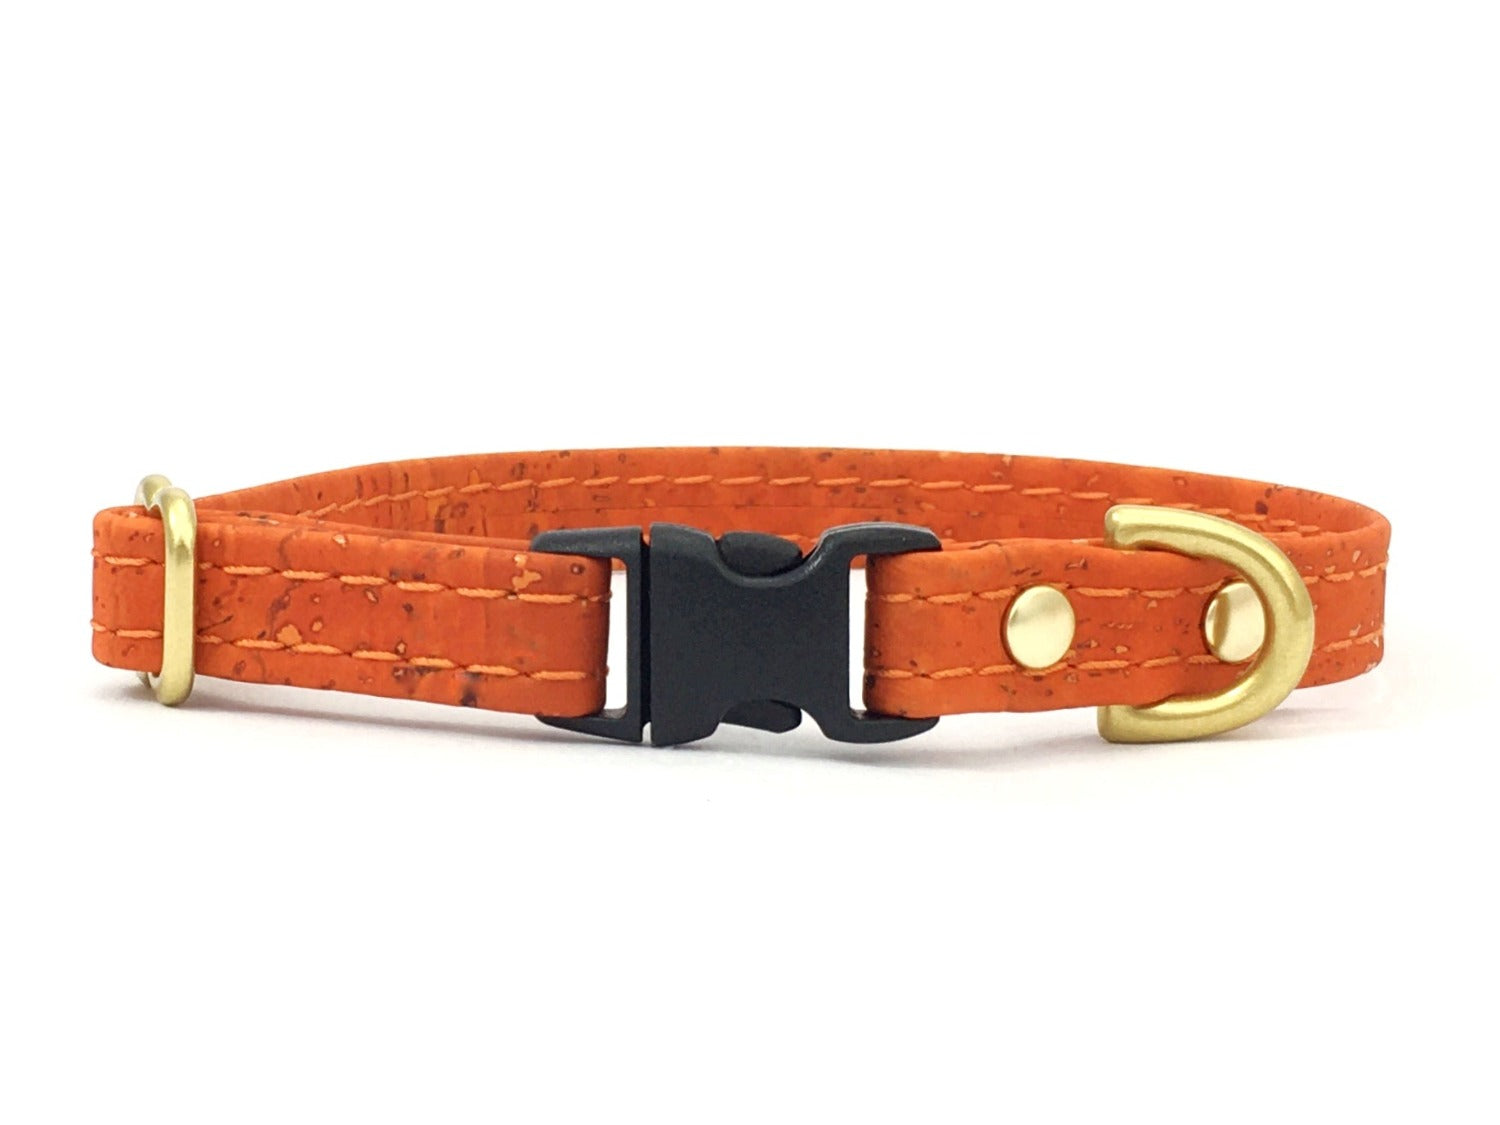 Orange vegan cork leather miniature dog and puppy collar for small and tiny dogs. Luxury brass hardware.